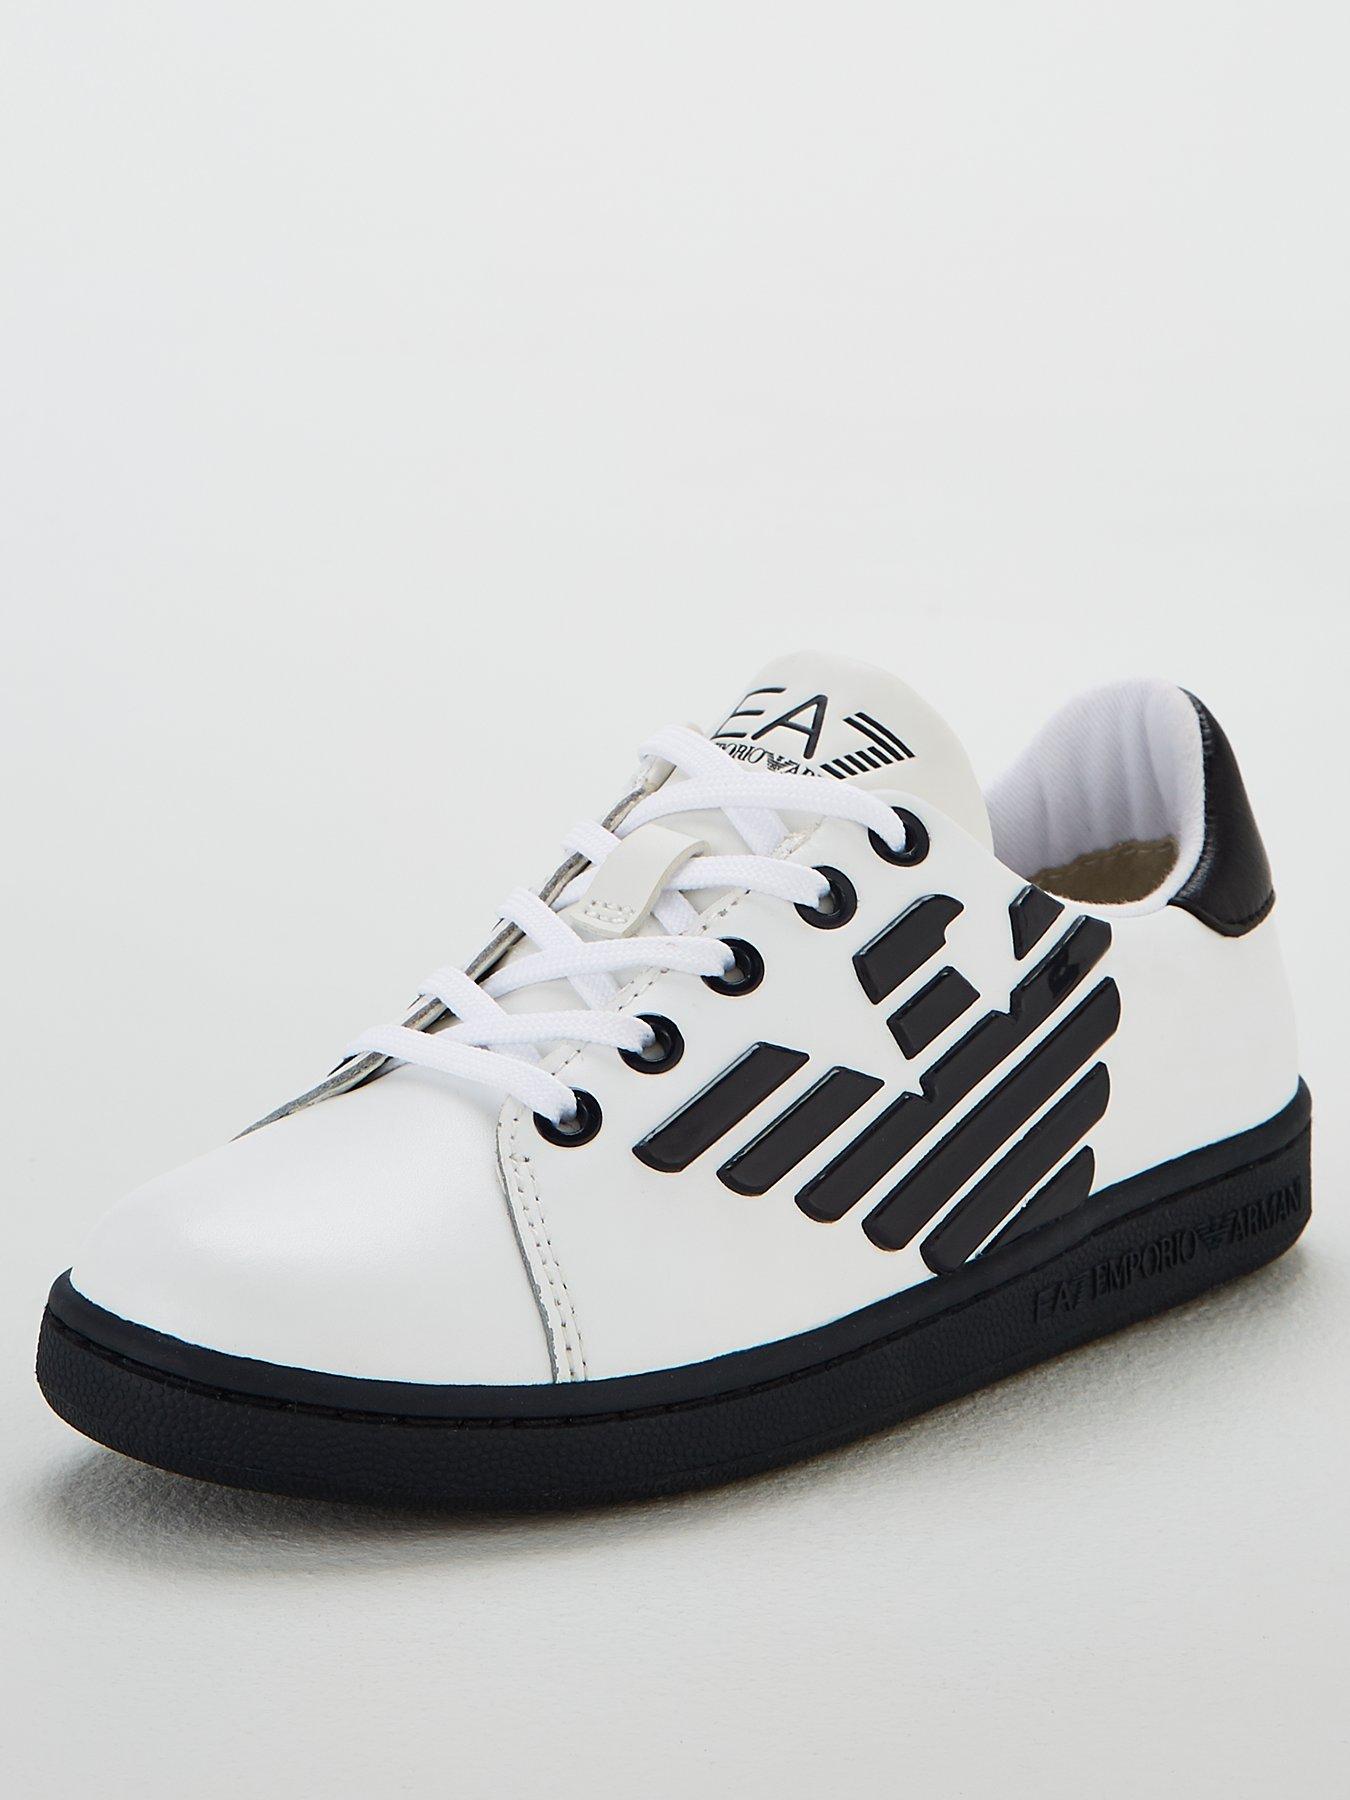 Lace Up Trainers - White/Blue 